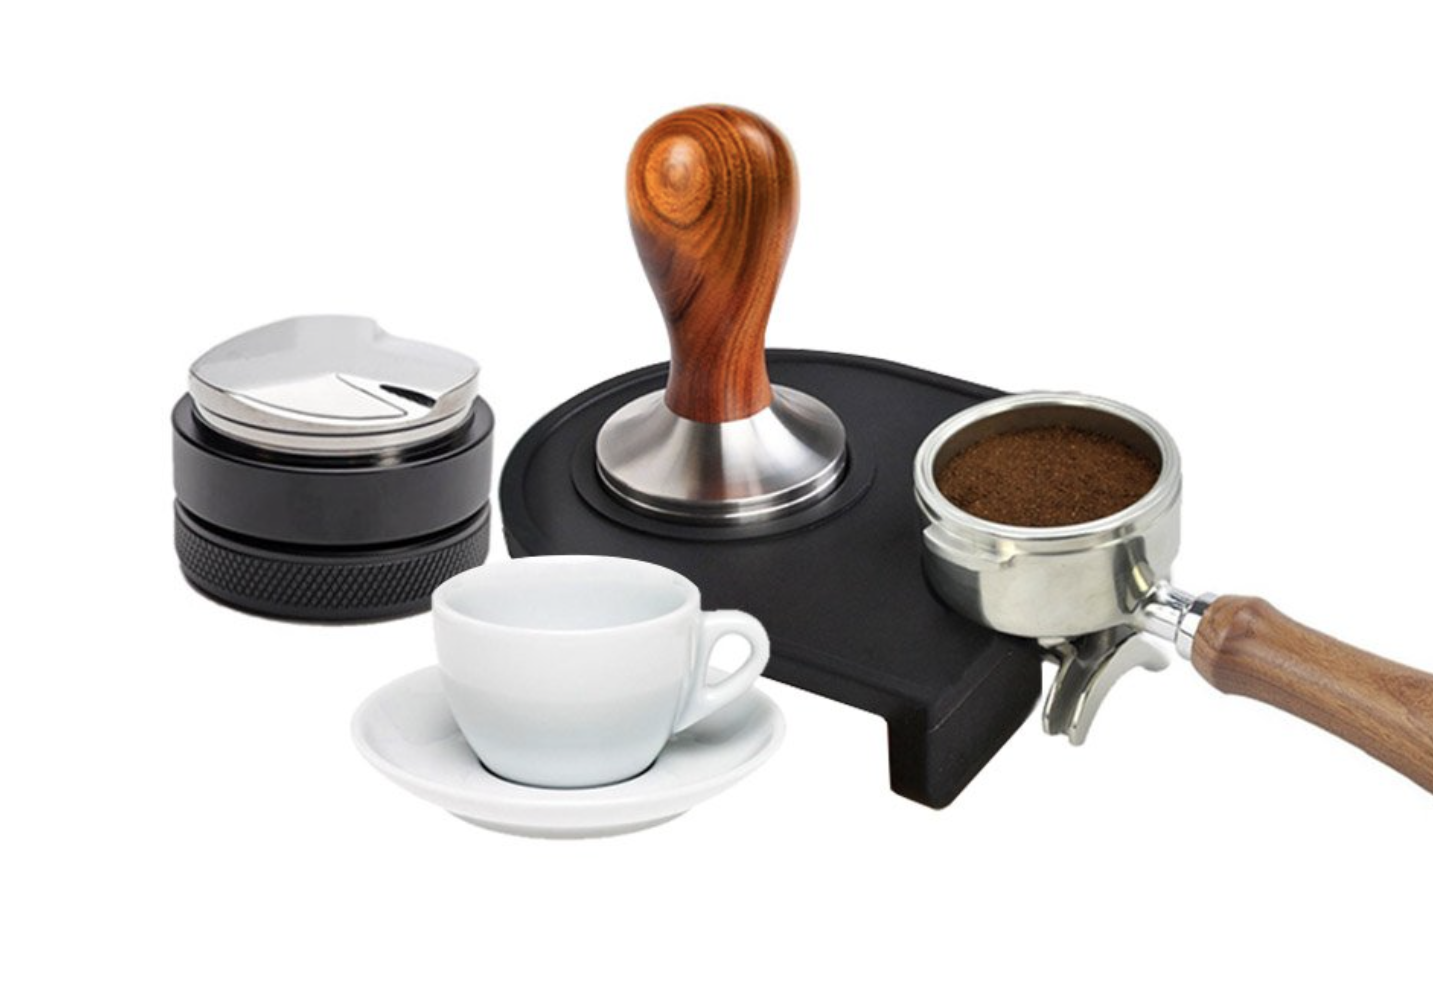 Keep your dad energized with a portable coffee maker, perfect for his on-the-go lifestyle